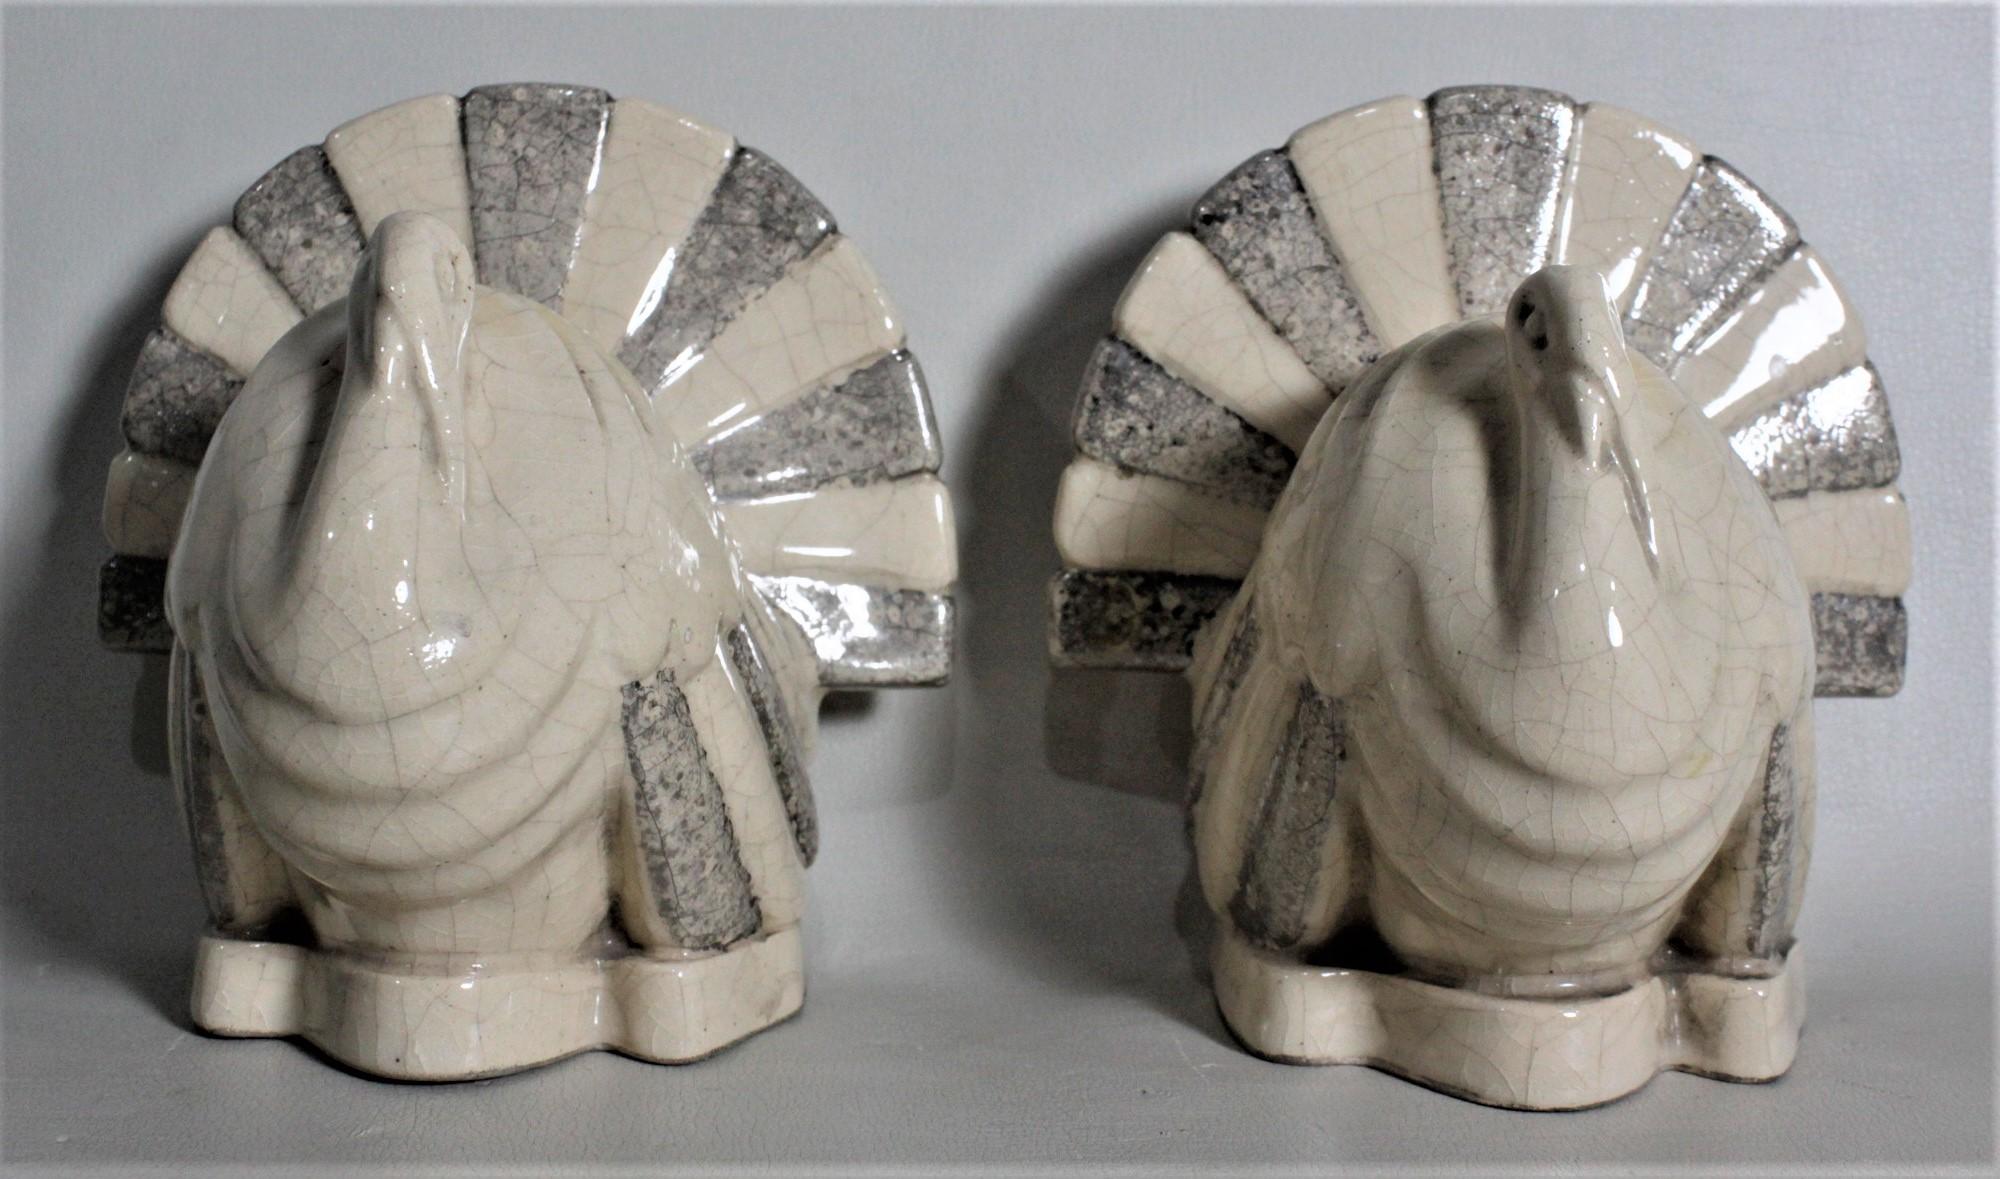 French Art Deco Figural Ceramic Turkey Bookends in Taupe and Charcoal Grey Luster Glaze For Sale